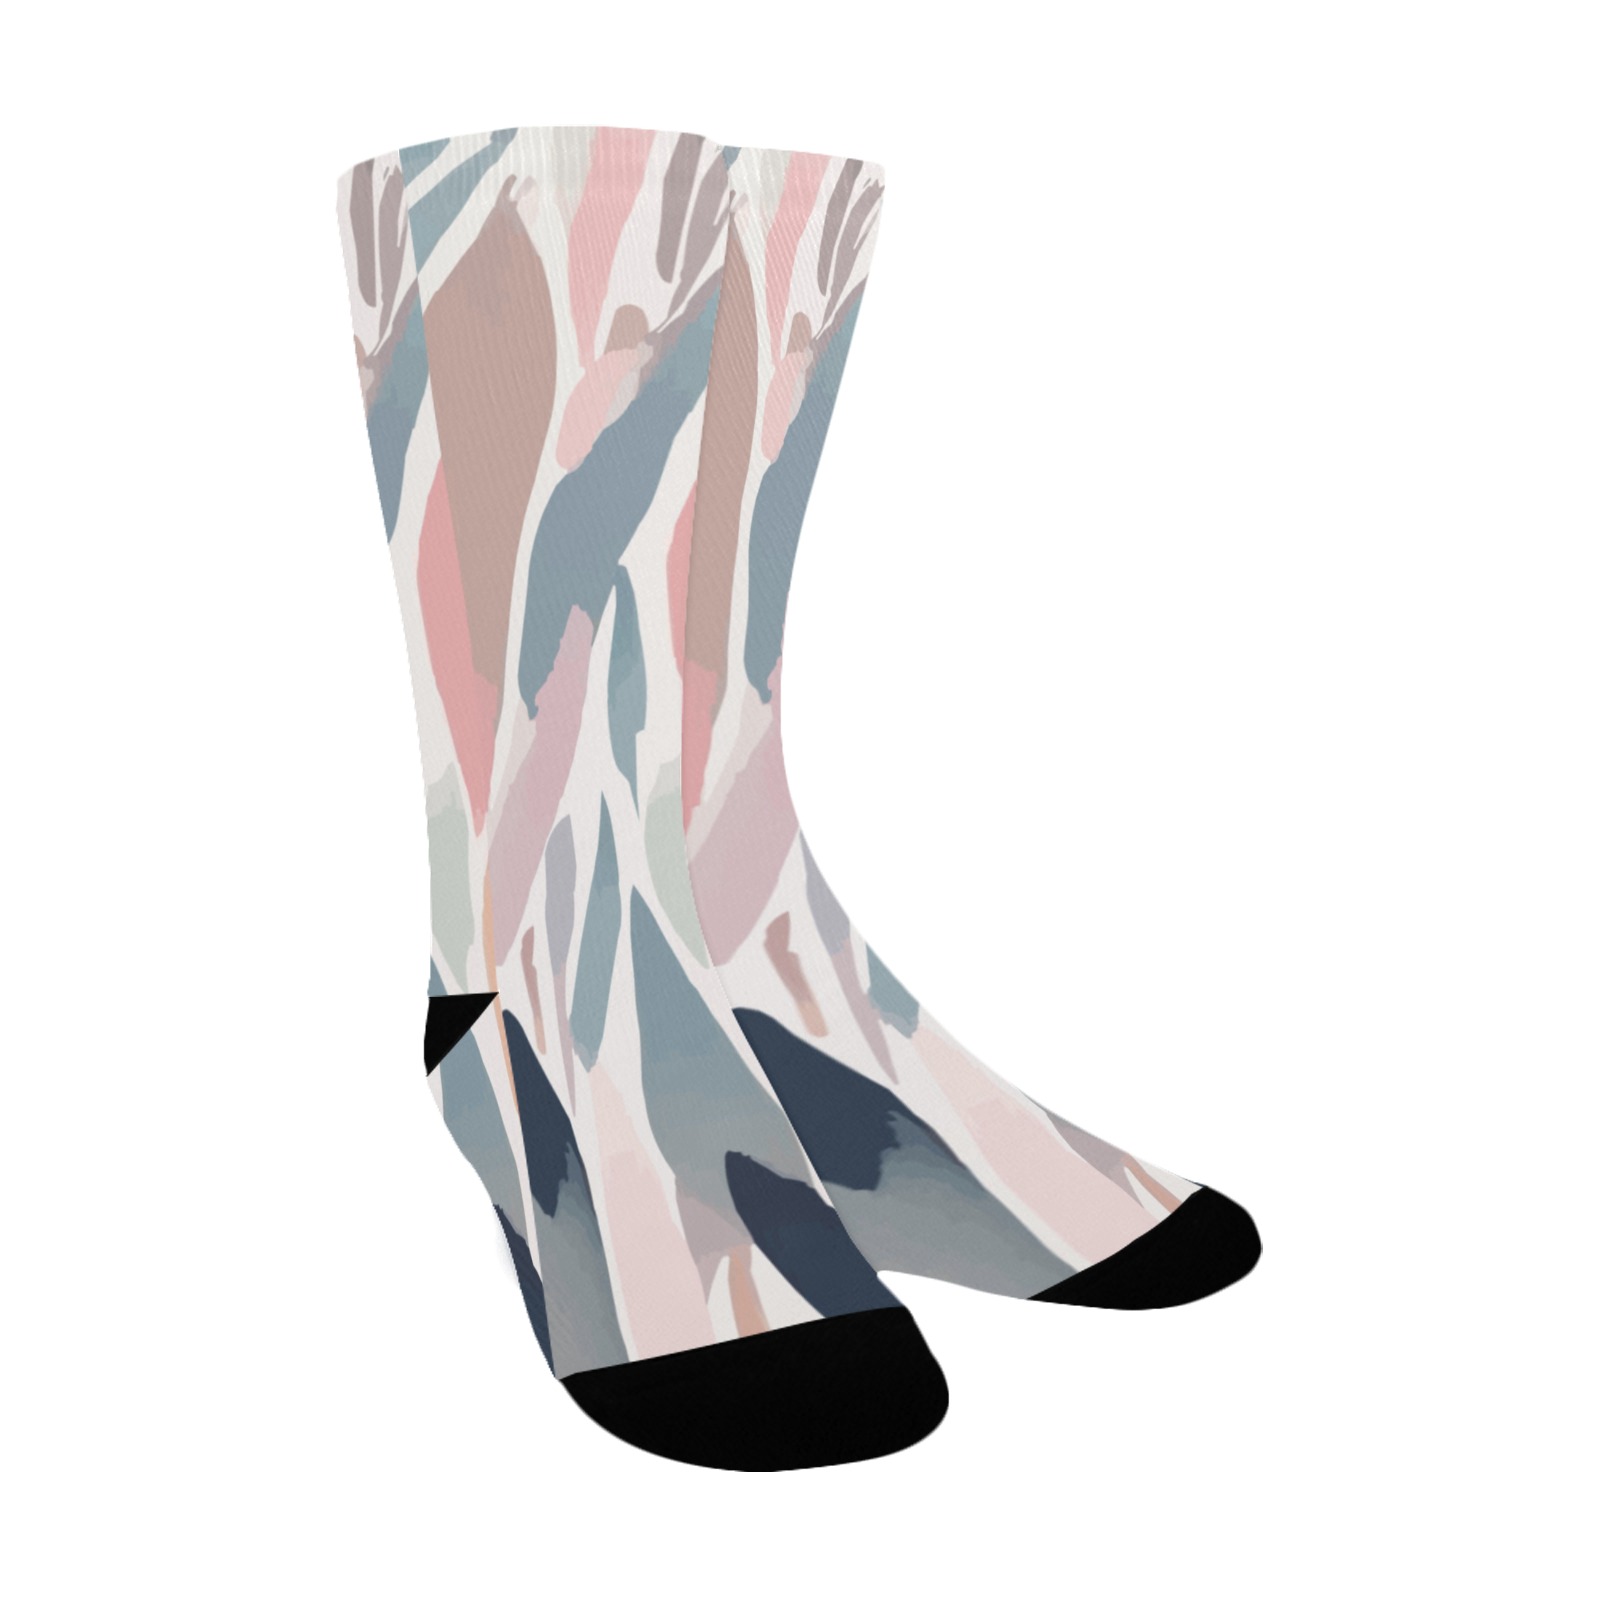 Stylish abstract shapes of pink, blue, gray colors Custom Socks for Women